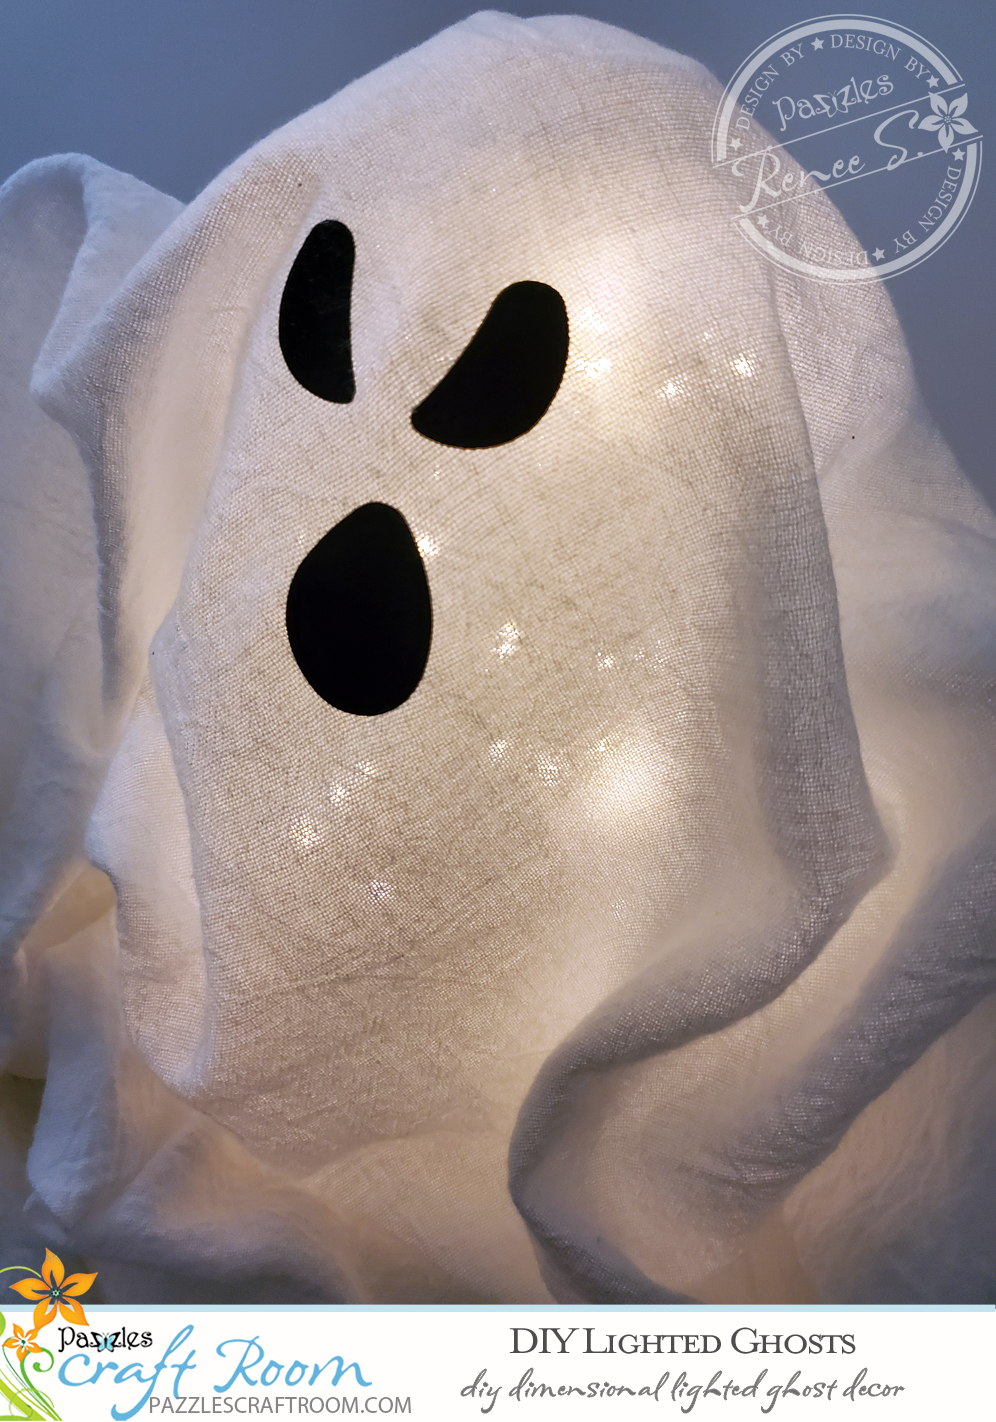 Pazzles DIY lighted ghost decor with instant SVG download. Compatible with all major electronic cutters including Pazzles Inspiration, Cricut, and Silhouette Cameo. Design by Renee Smart.